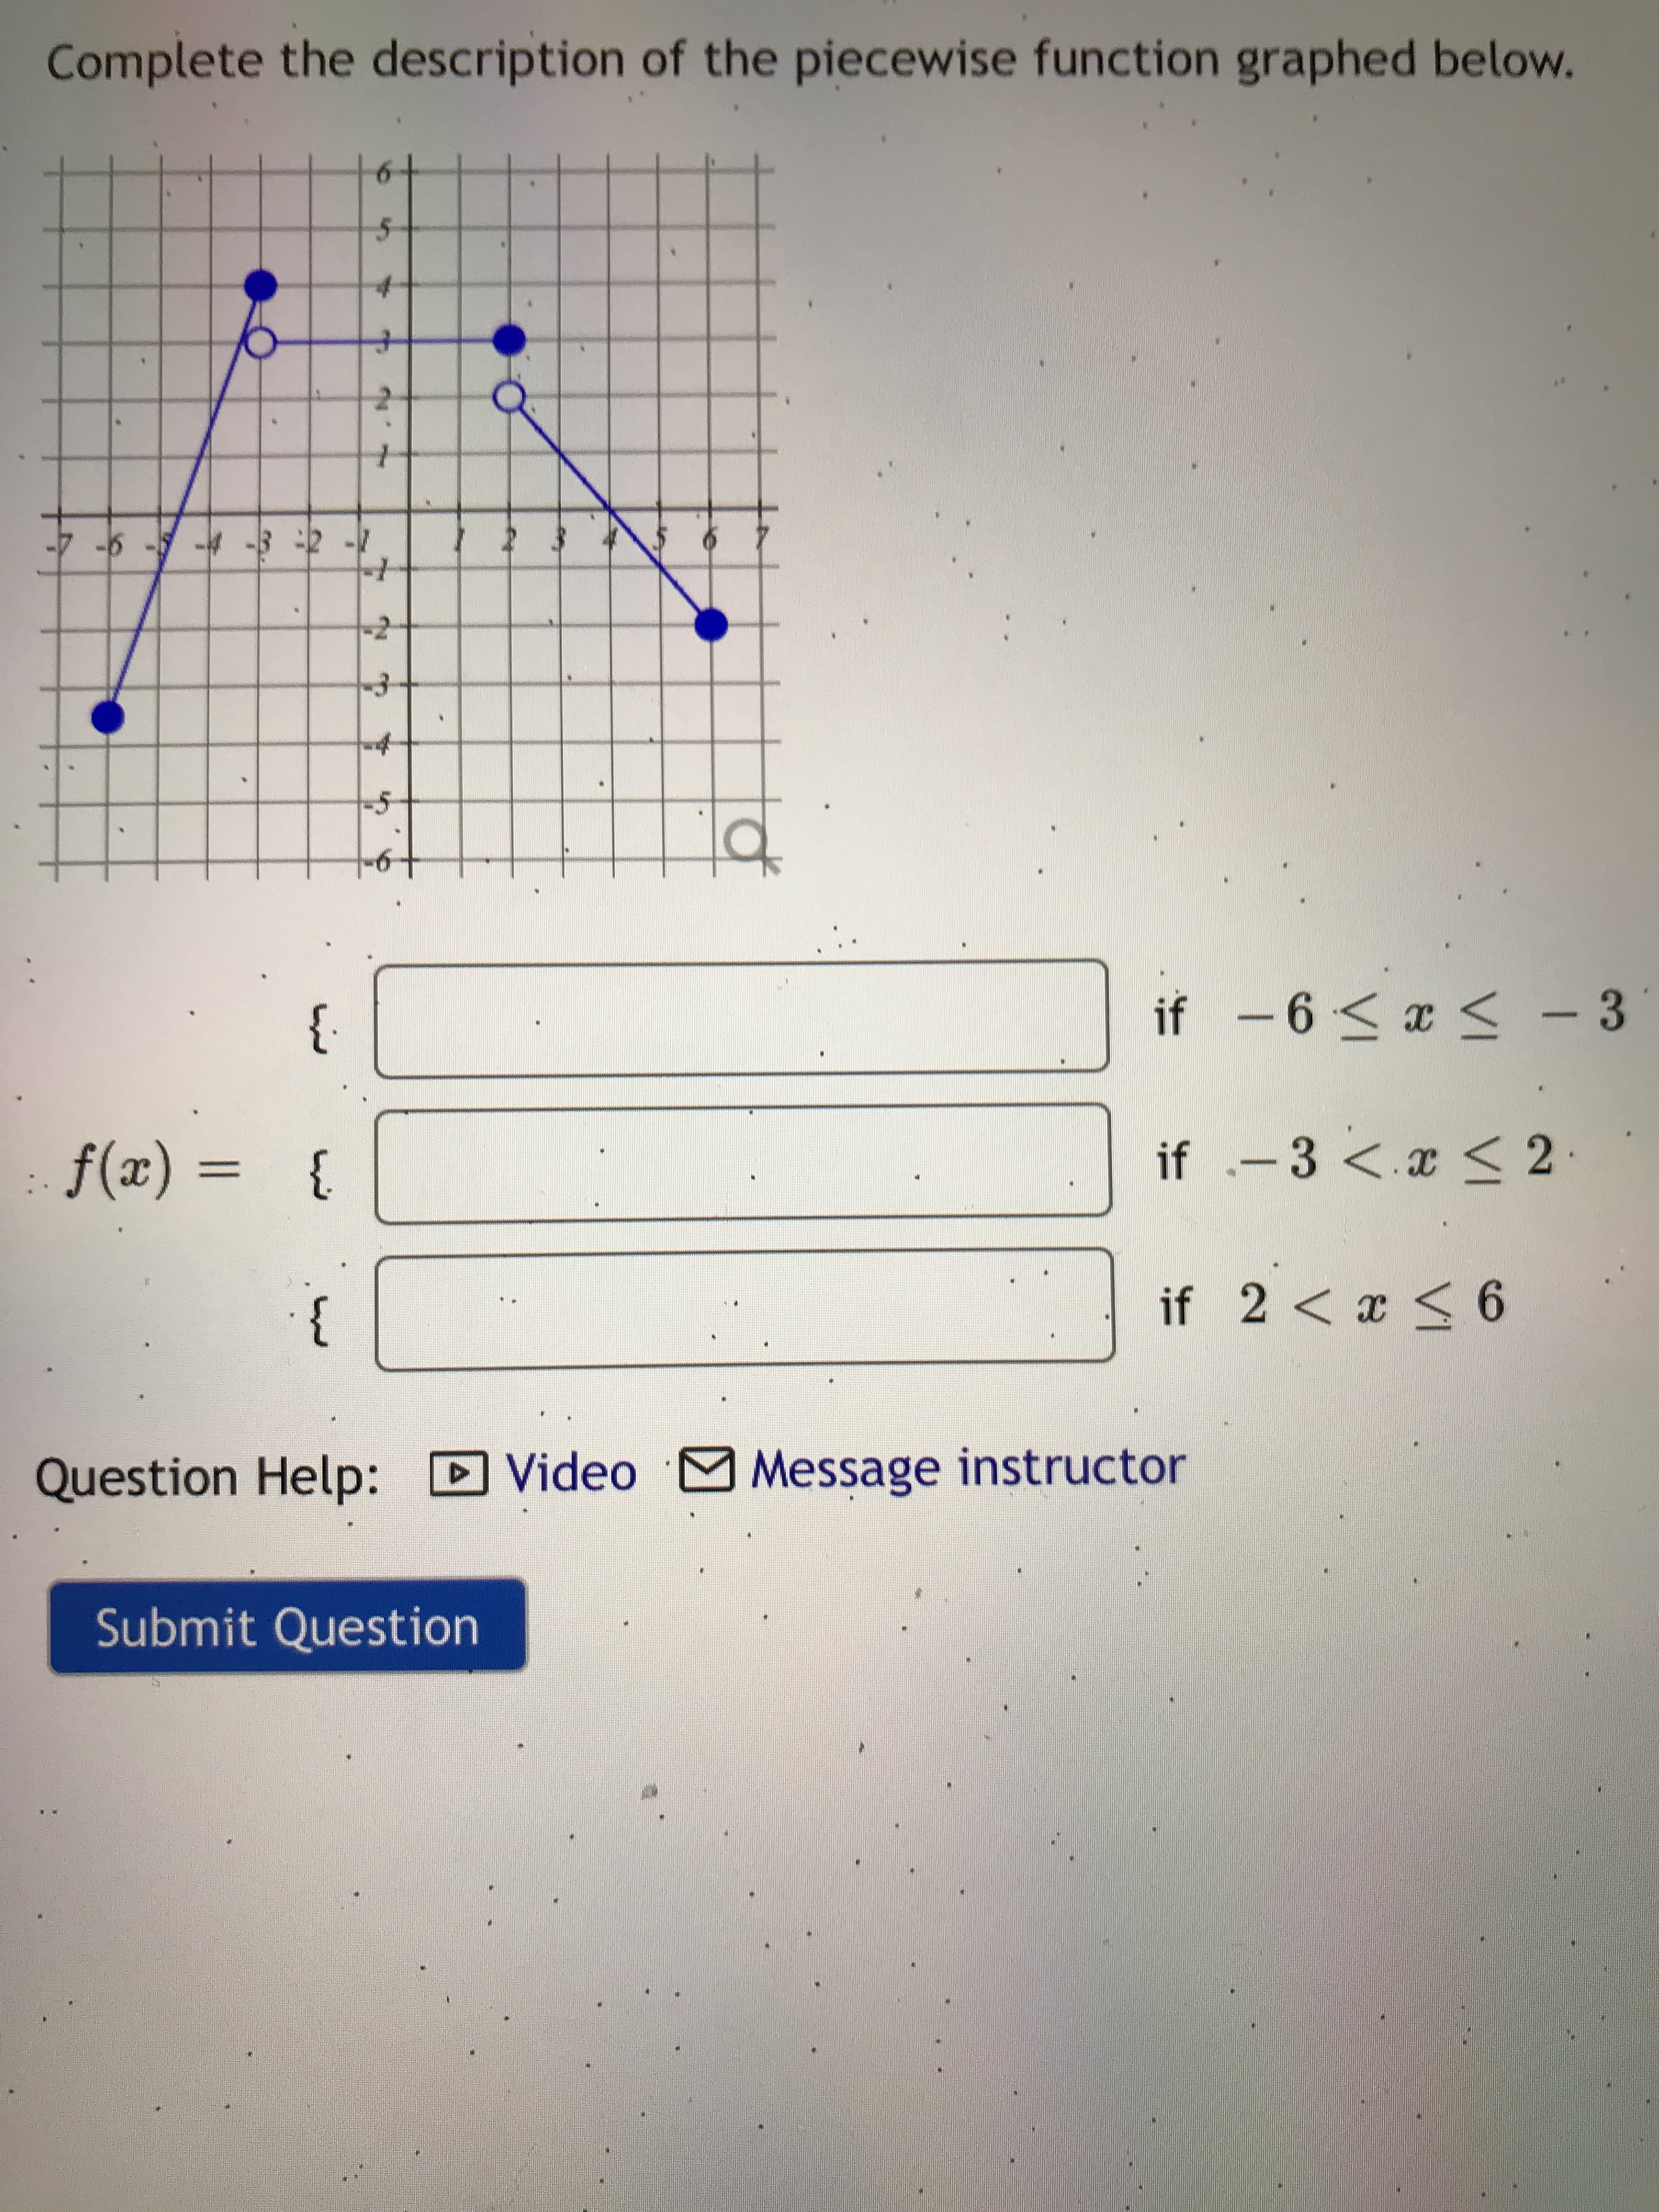 Complete the description of the piecewise function graphed below.
小本
- ホ-
9-
if .-3 <.x < 2
}
if 2 < x < 6
}.
Question Help: D Video M Message instructor
Submit Question
